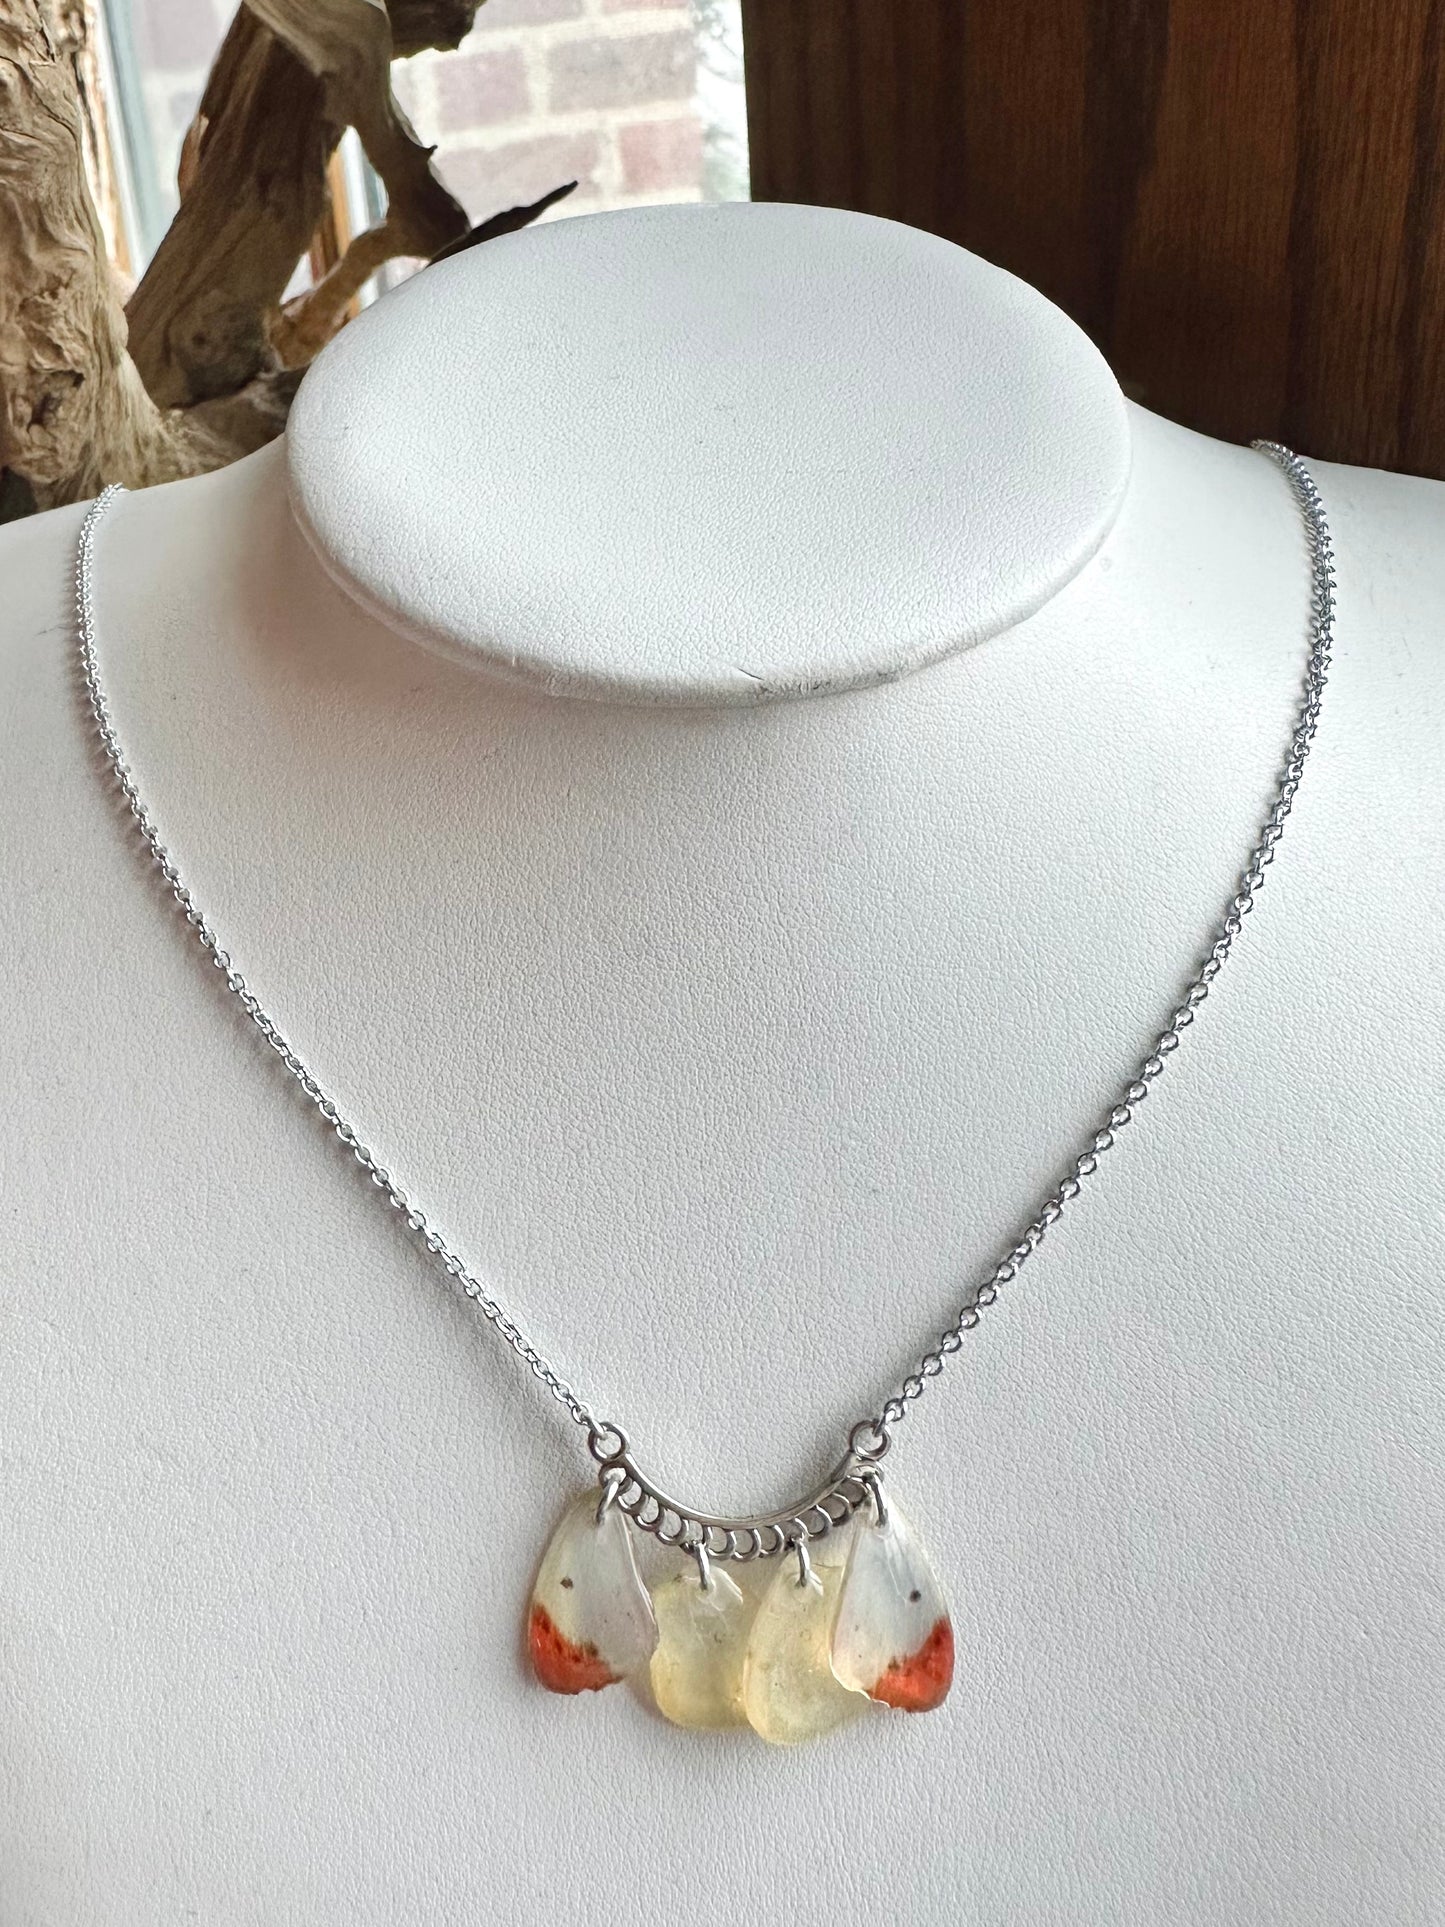 Real Orange Tip Butterfly Necklace - Statement Piece for Nature Lovers